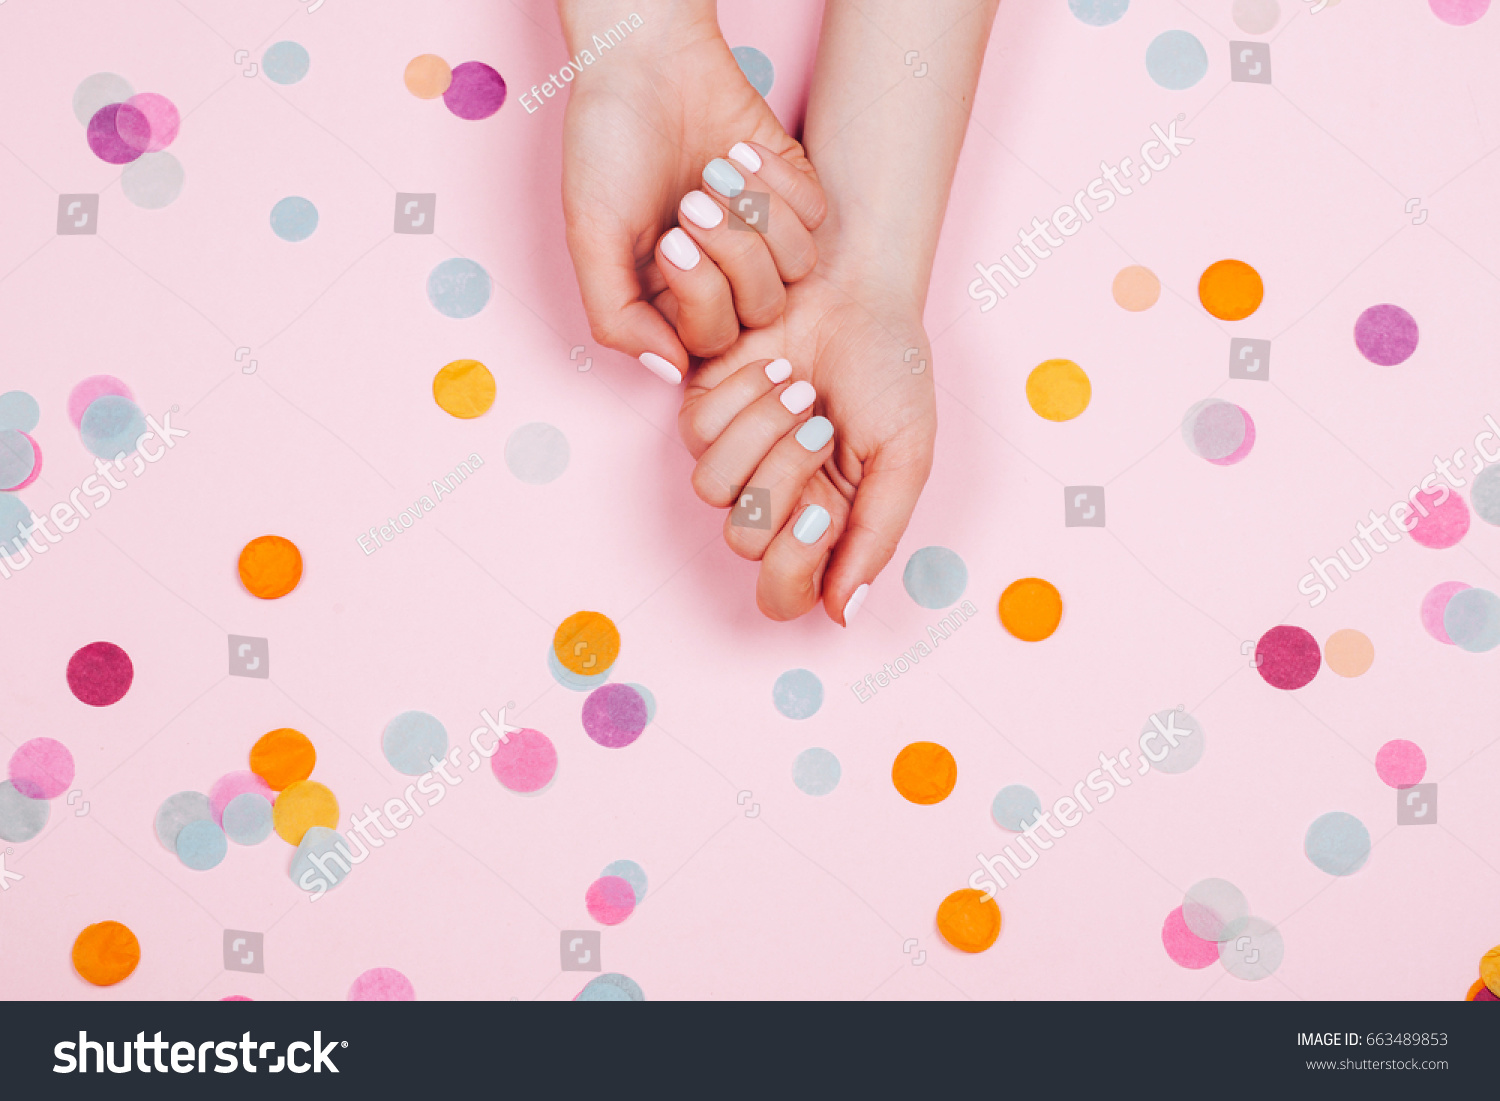 Stylish trendy female pink and blue manicure. Beautiful young woman's hands on pink pastel background with festive multicolored confetti. #663489853